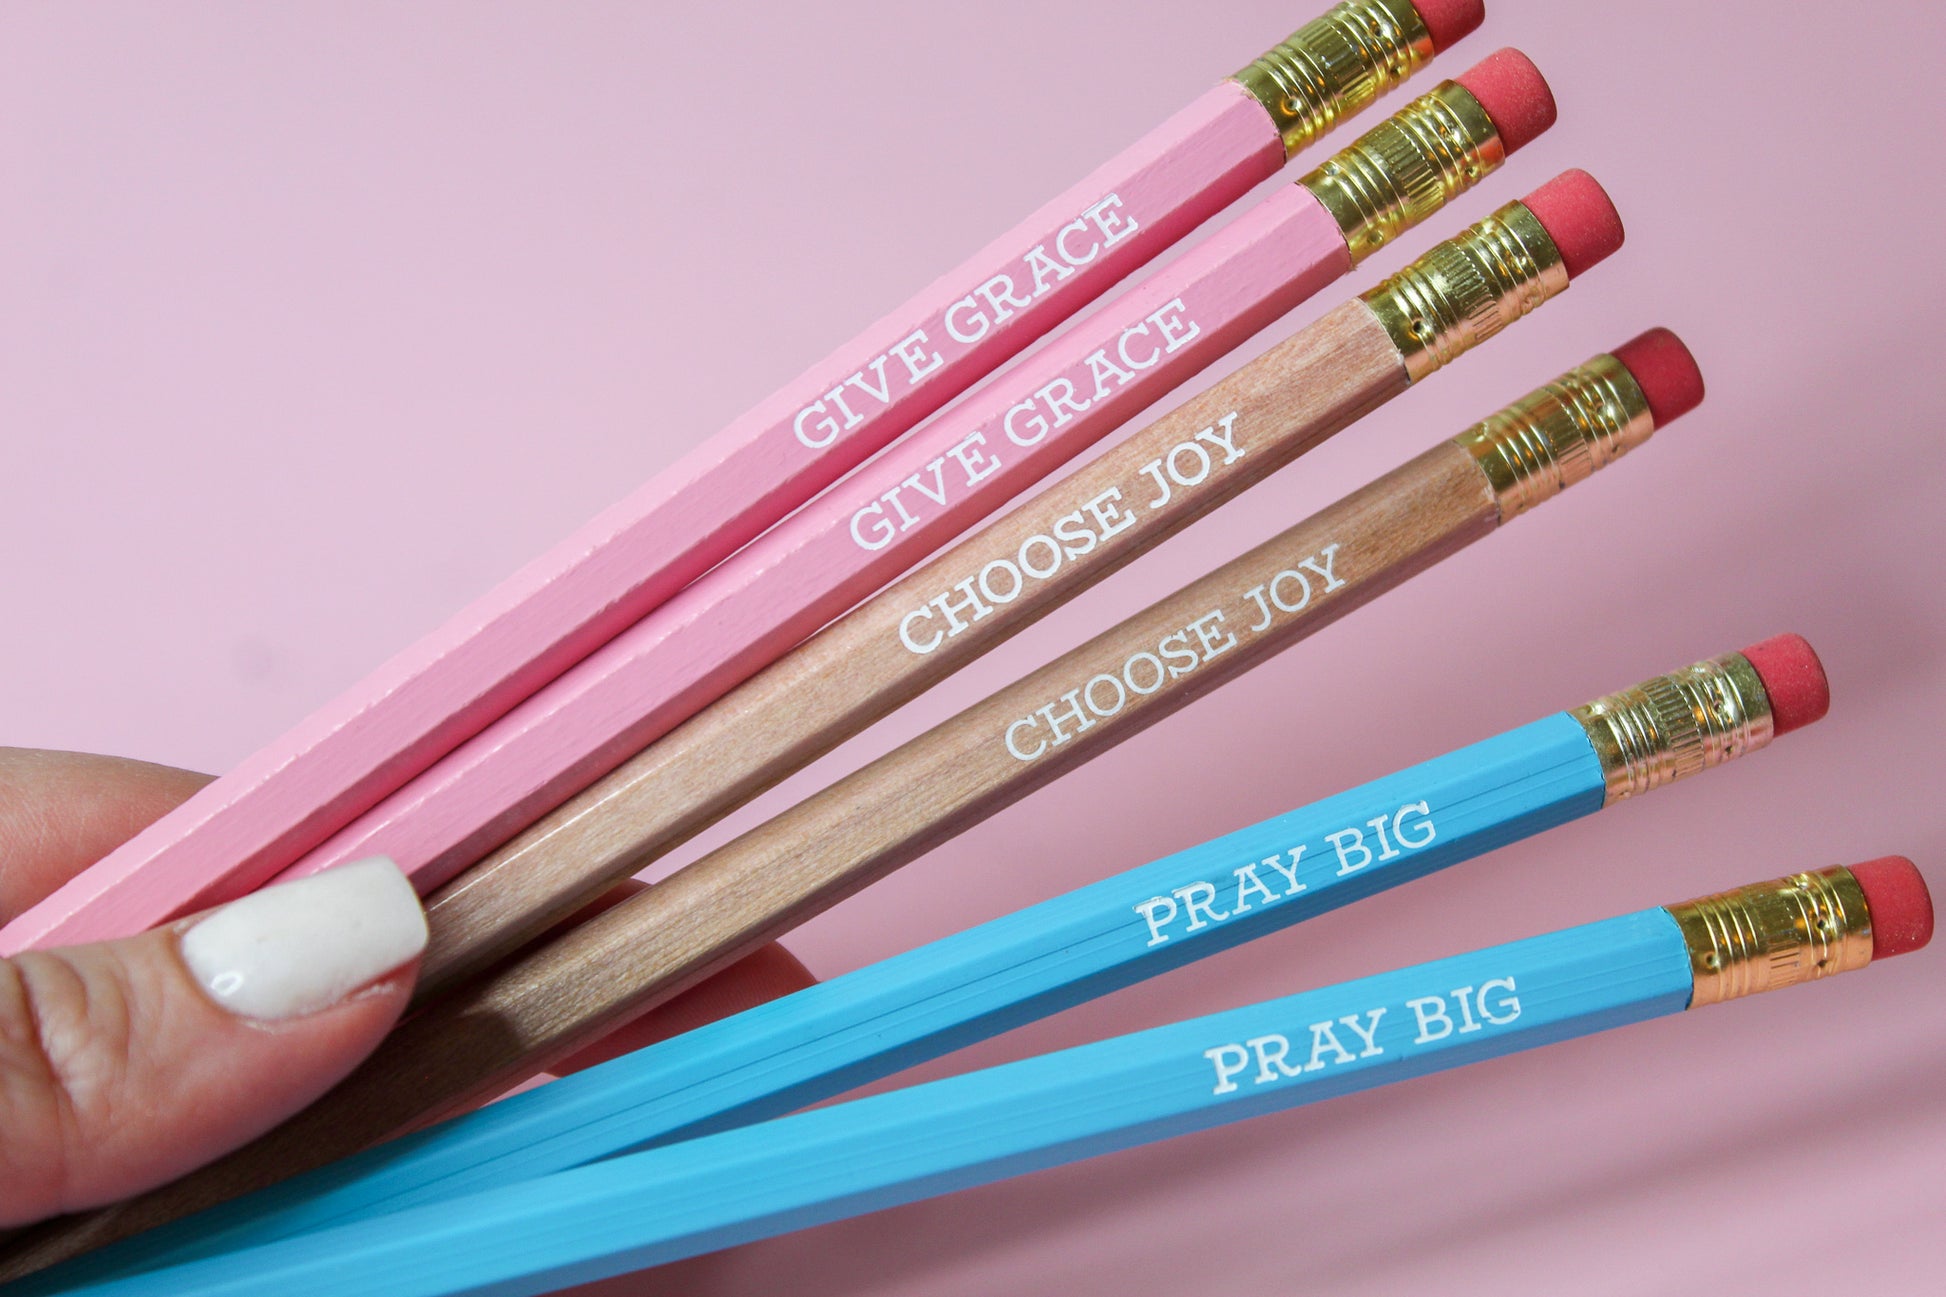 Give Grace, Choose Joy, Pray Big Pencil Set is a hopeful Pencil Set that has six pencils: two pink pencils imprinted with "give grace", two natural wood pencils imprinted with "choose joy" and two blue pencils imprinted with "pray big. 